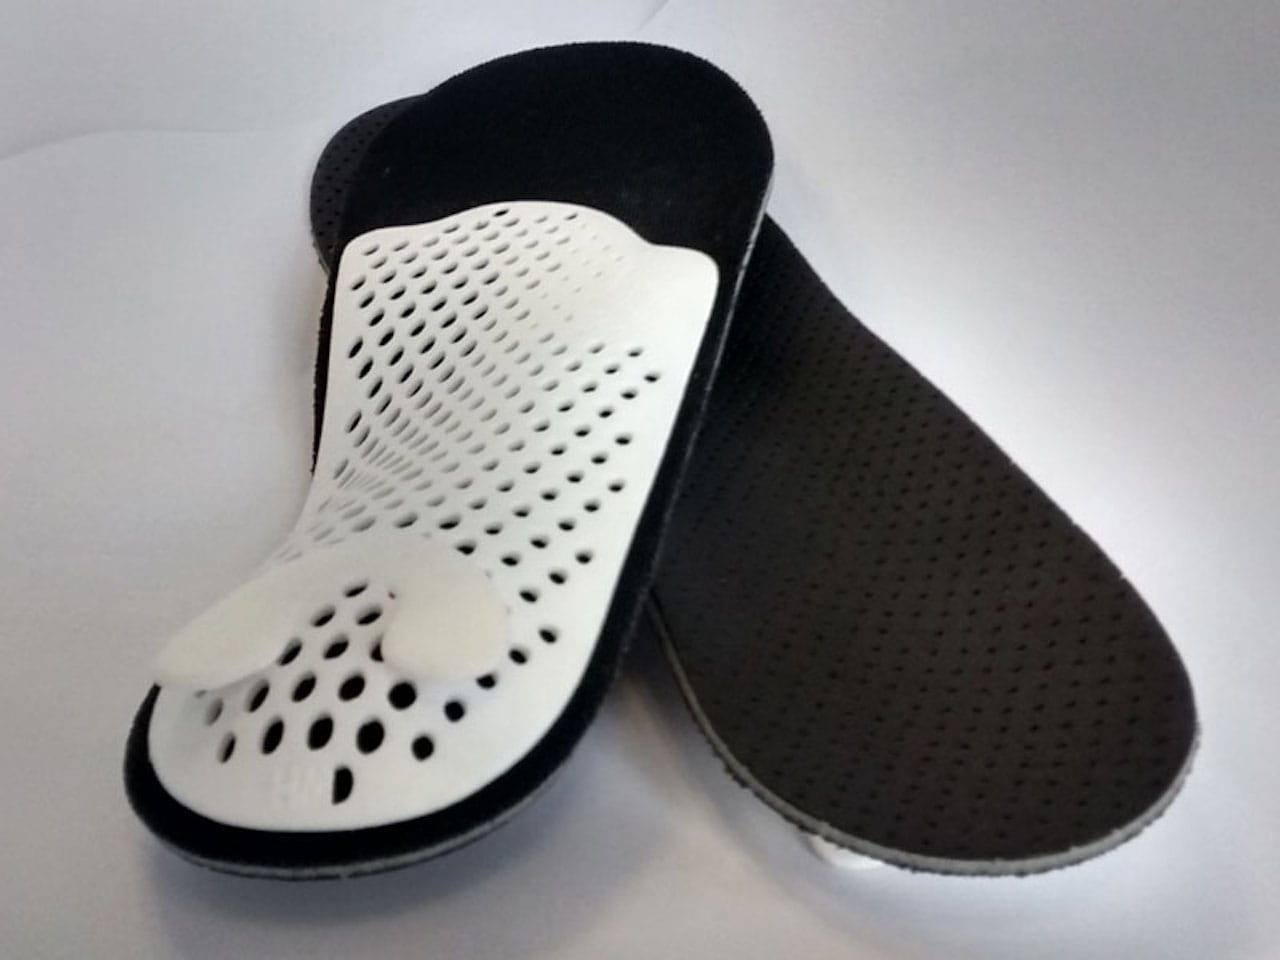  Prodways is focusing on the 3D printed footwear market 